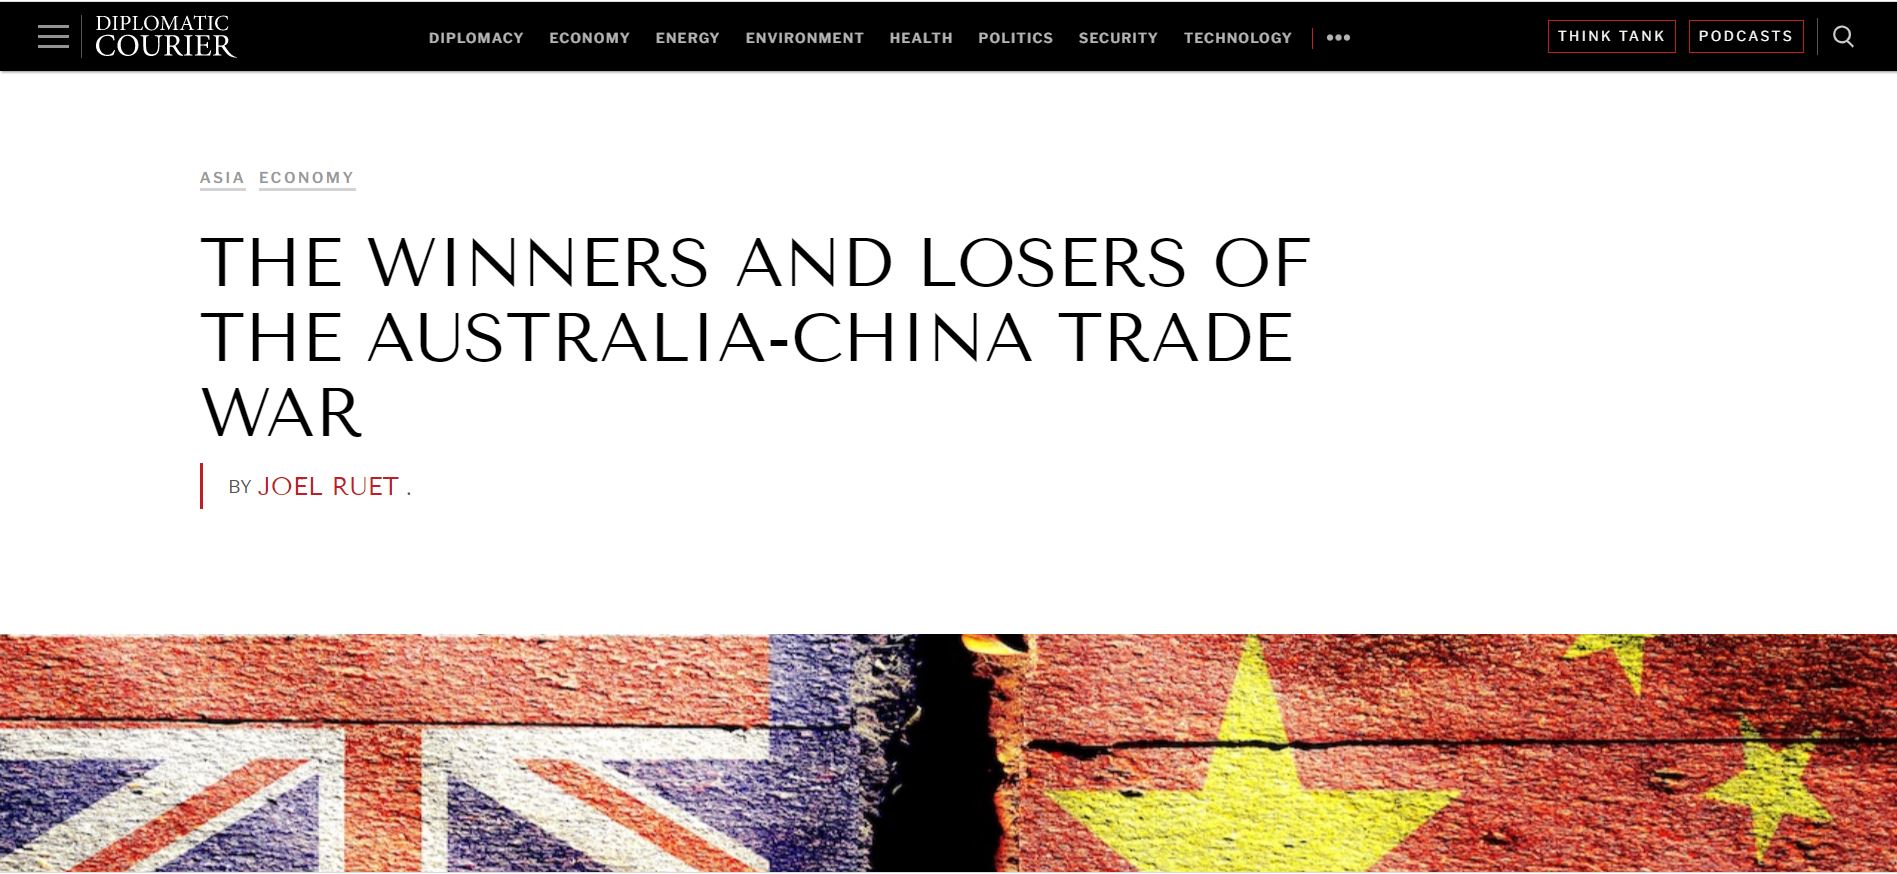 Tribune: The Winners and Losers of the Australian-China Trade War